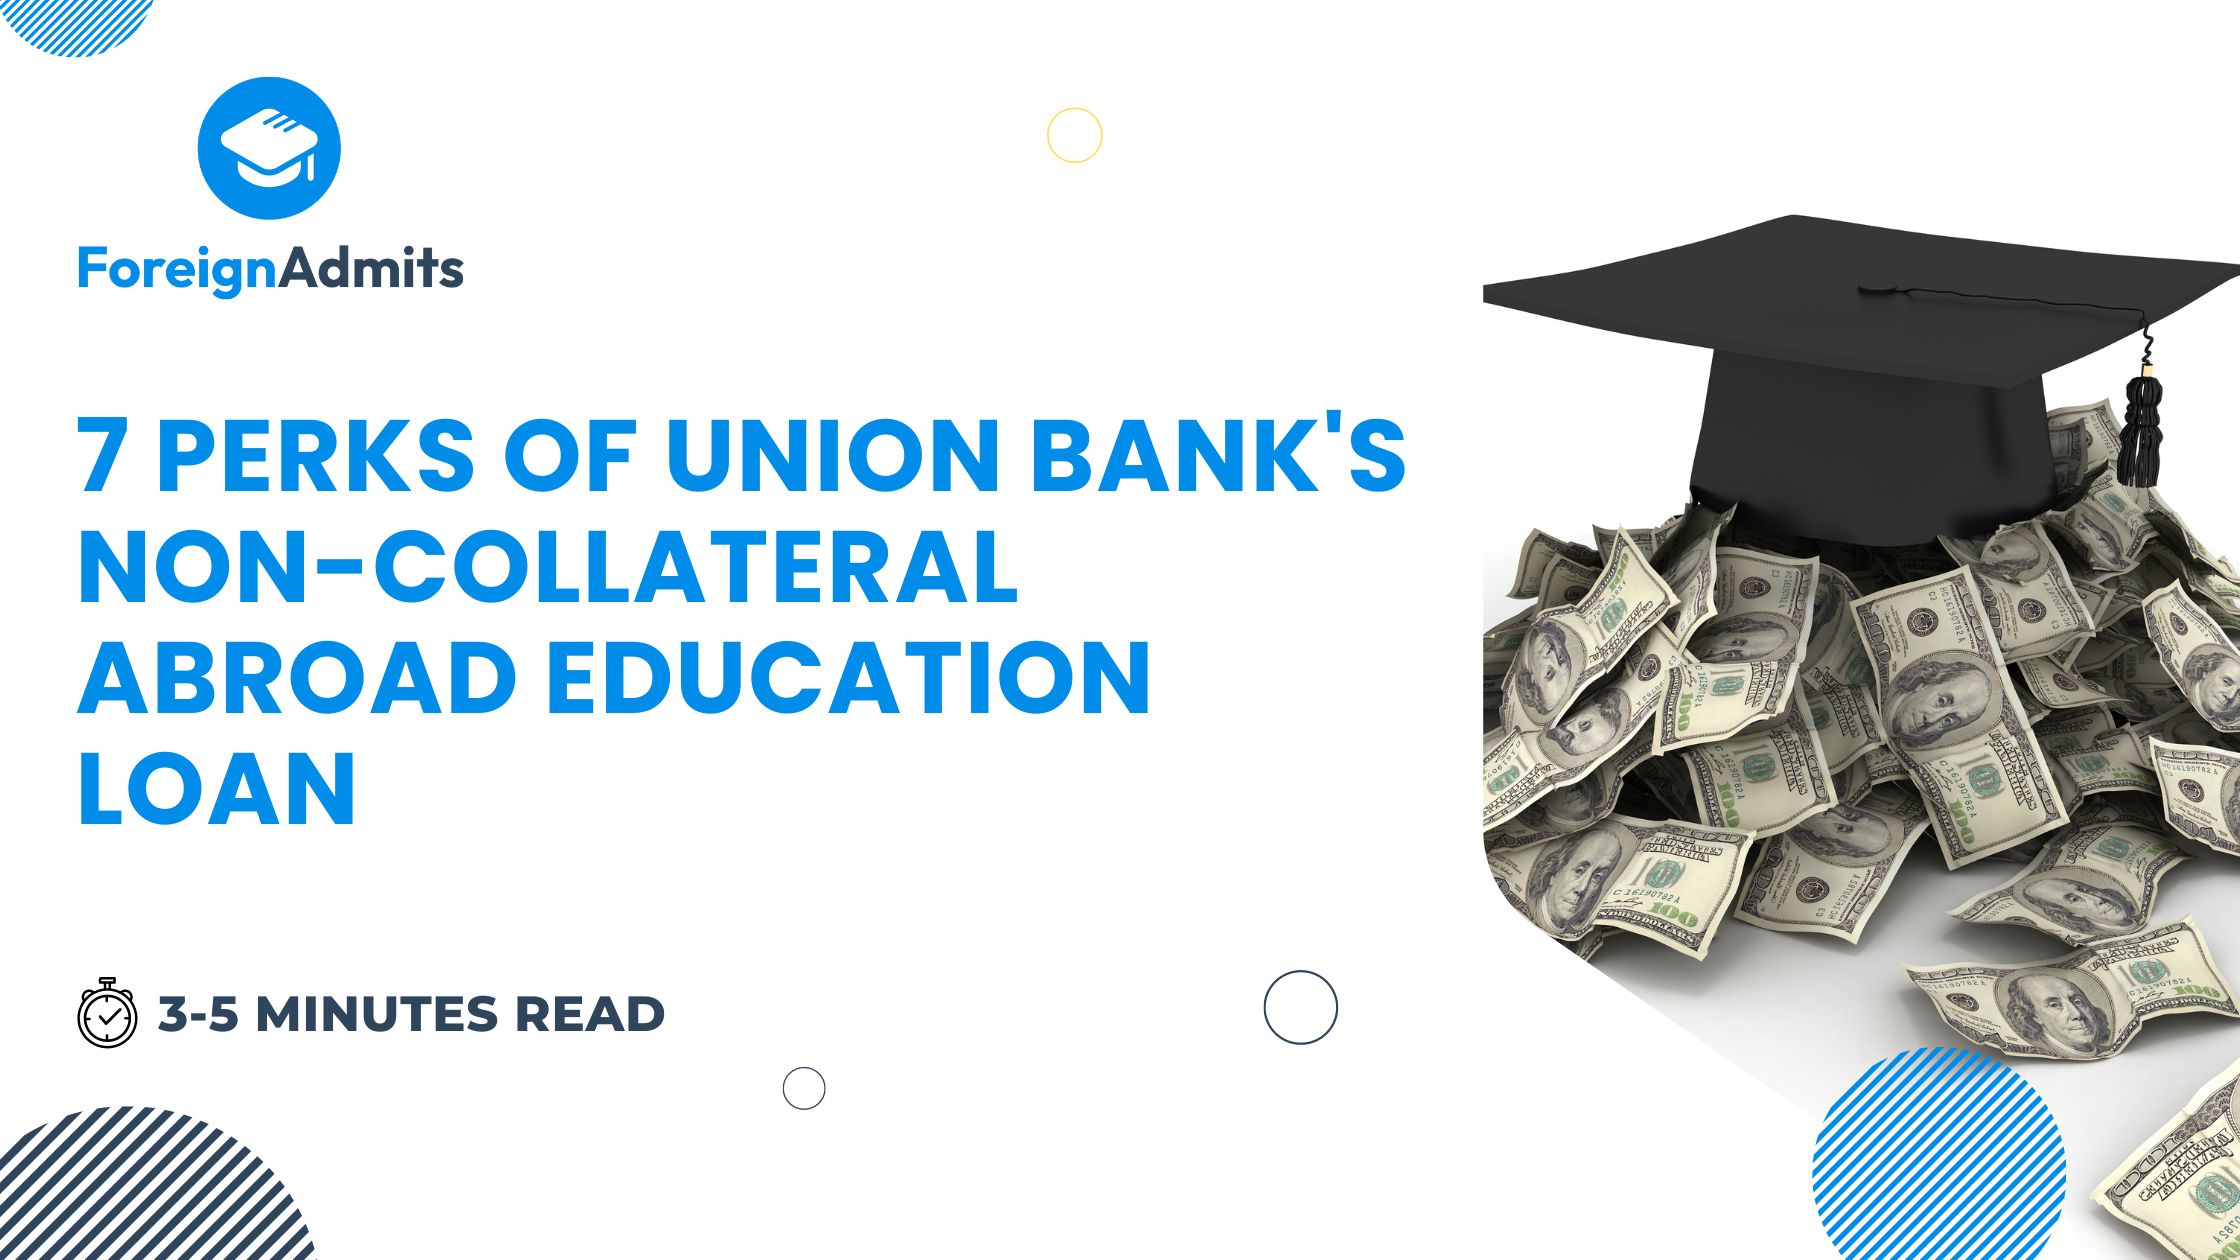 7 Perks of Union Bank’s Non-Collateral Abroad Education Loan